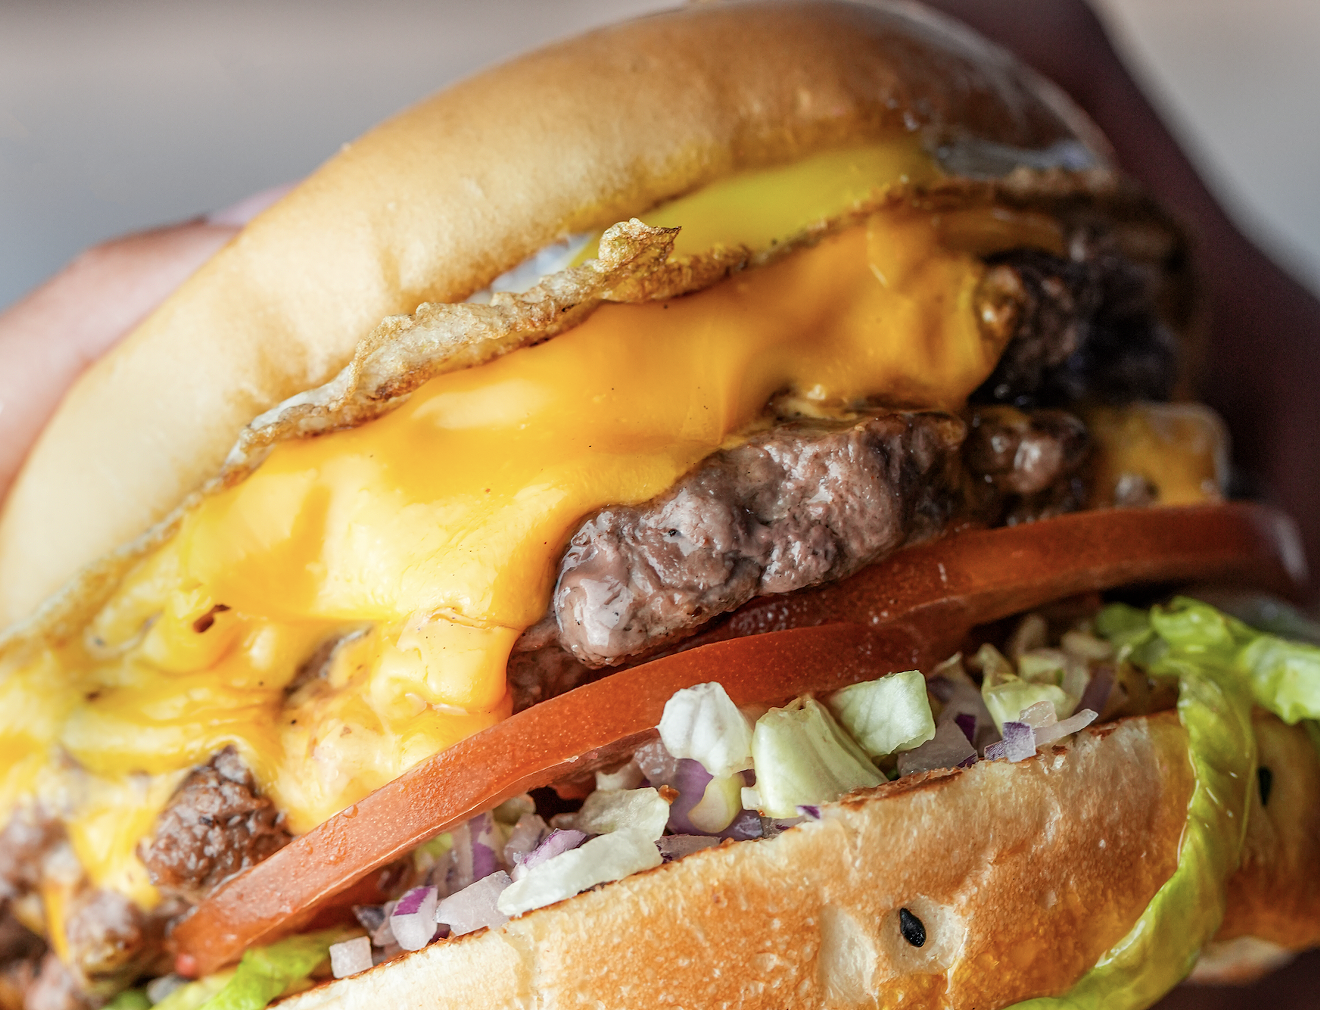 La Birra Bar's juicy burgers are coming to Wynwood this April.